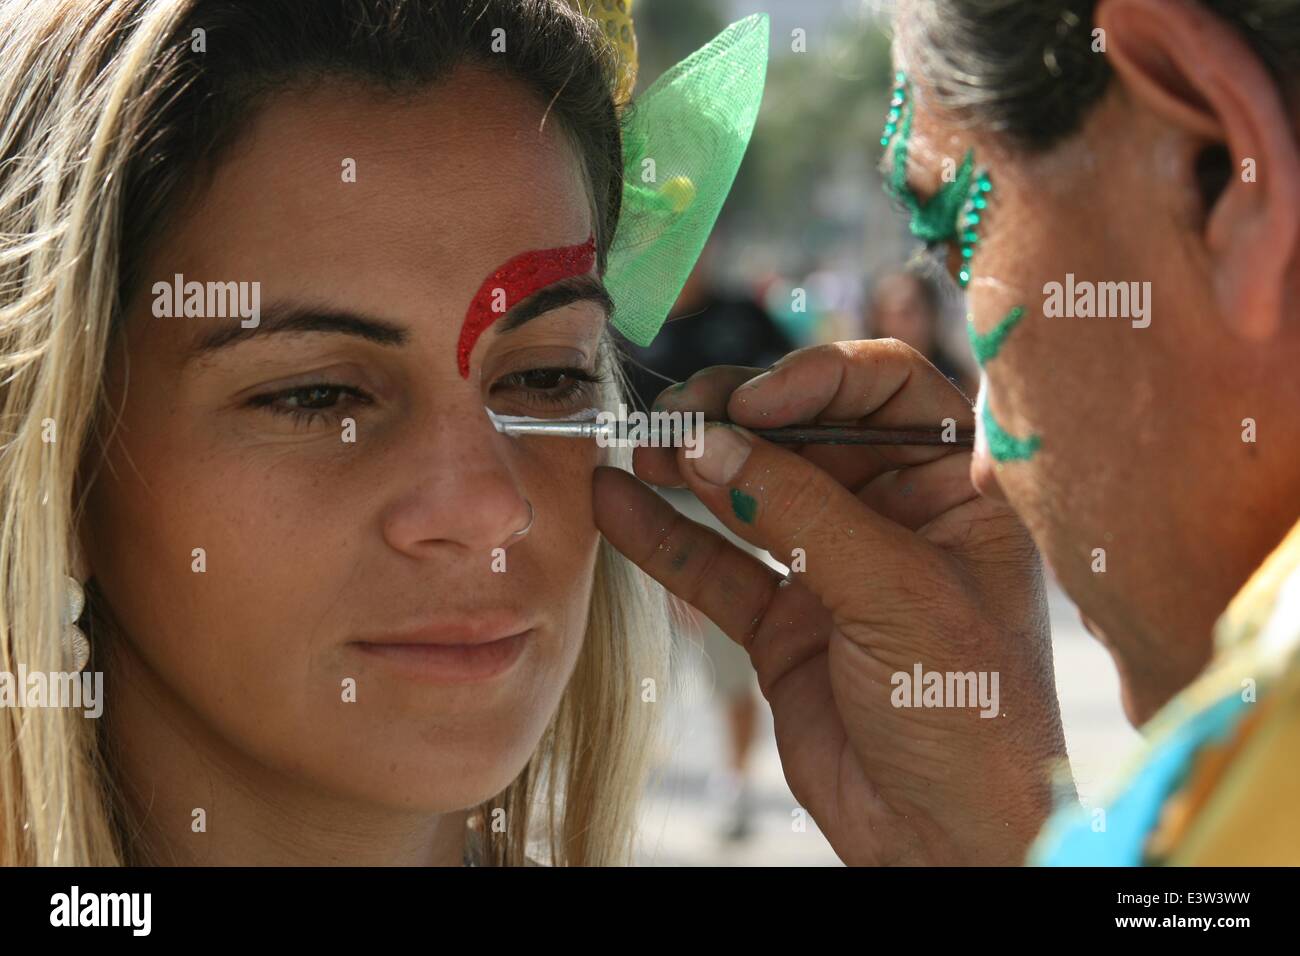 Rio de Janeiro, Brazil. 29th June 2014. 2014 FIFA World Cup Brazil. A young Brazilian having her face painted in the colors of the Dutch flag, before going to the FIFA Fan Fest in Copacabana Beach, before the match Netherlands 2x1 Mexico in the Round of 16. Face painting is very popular among fans in the World Cup. Rio de Janeiro, Brazil, 29th June, 2014. Credit:  Maria Adelaide Silva/Alamy Live News Stock Photo